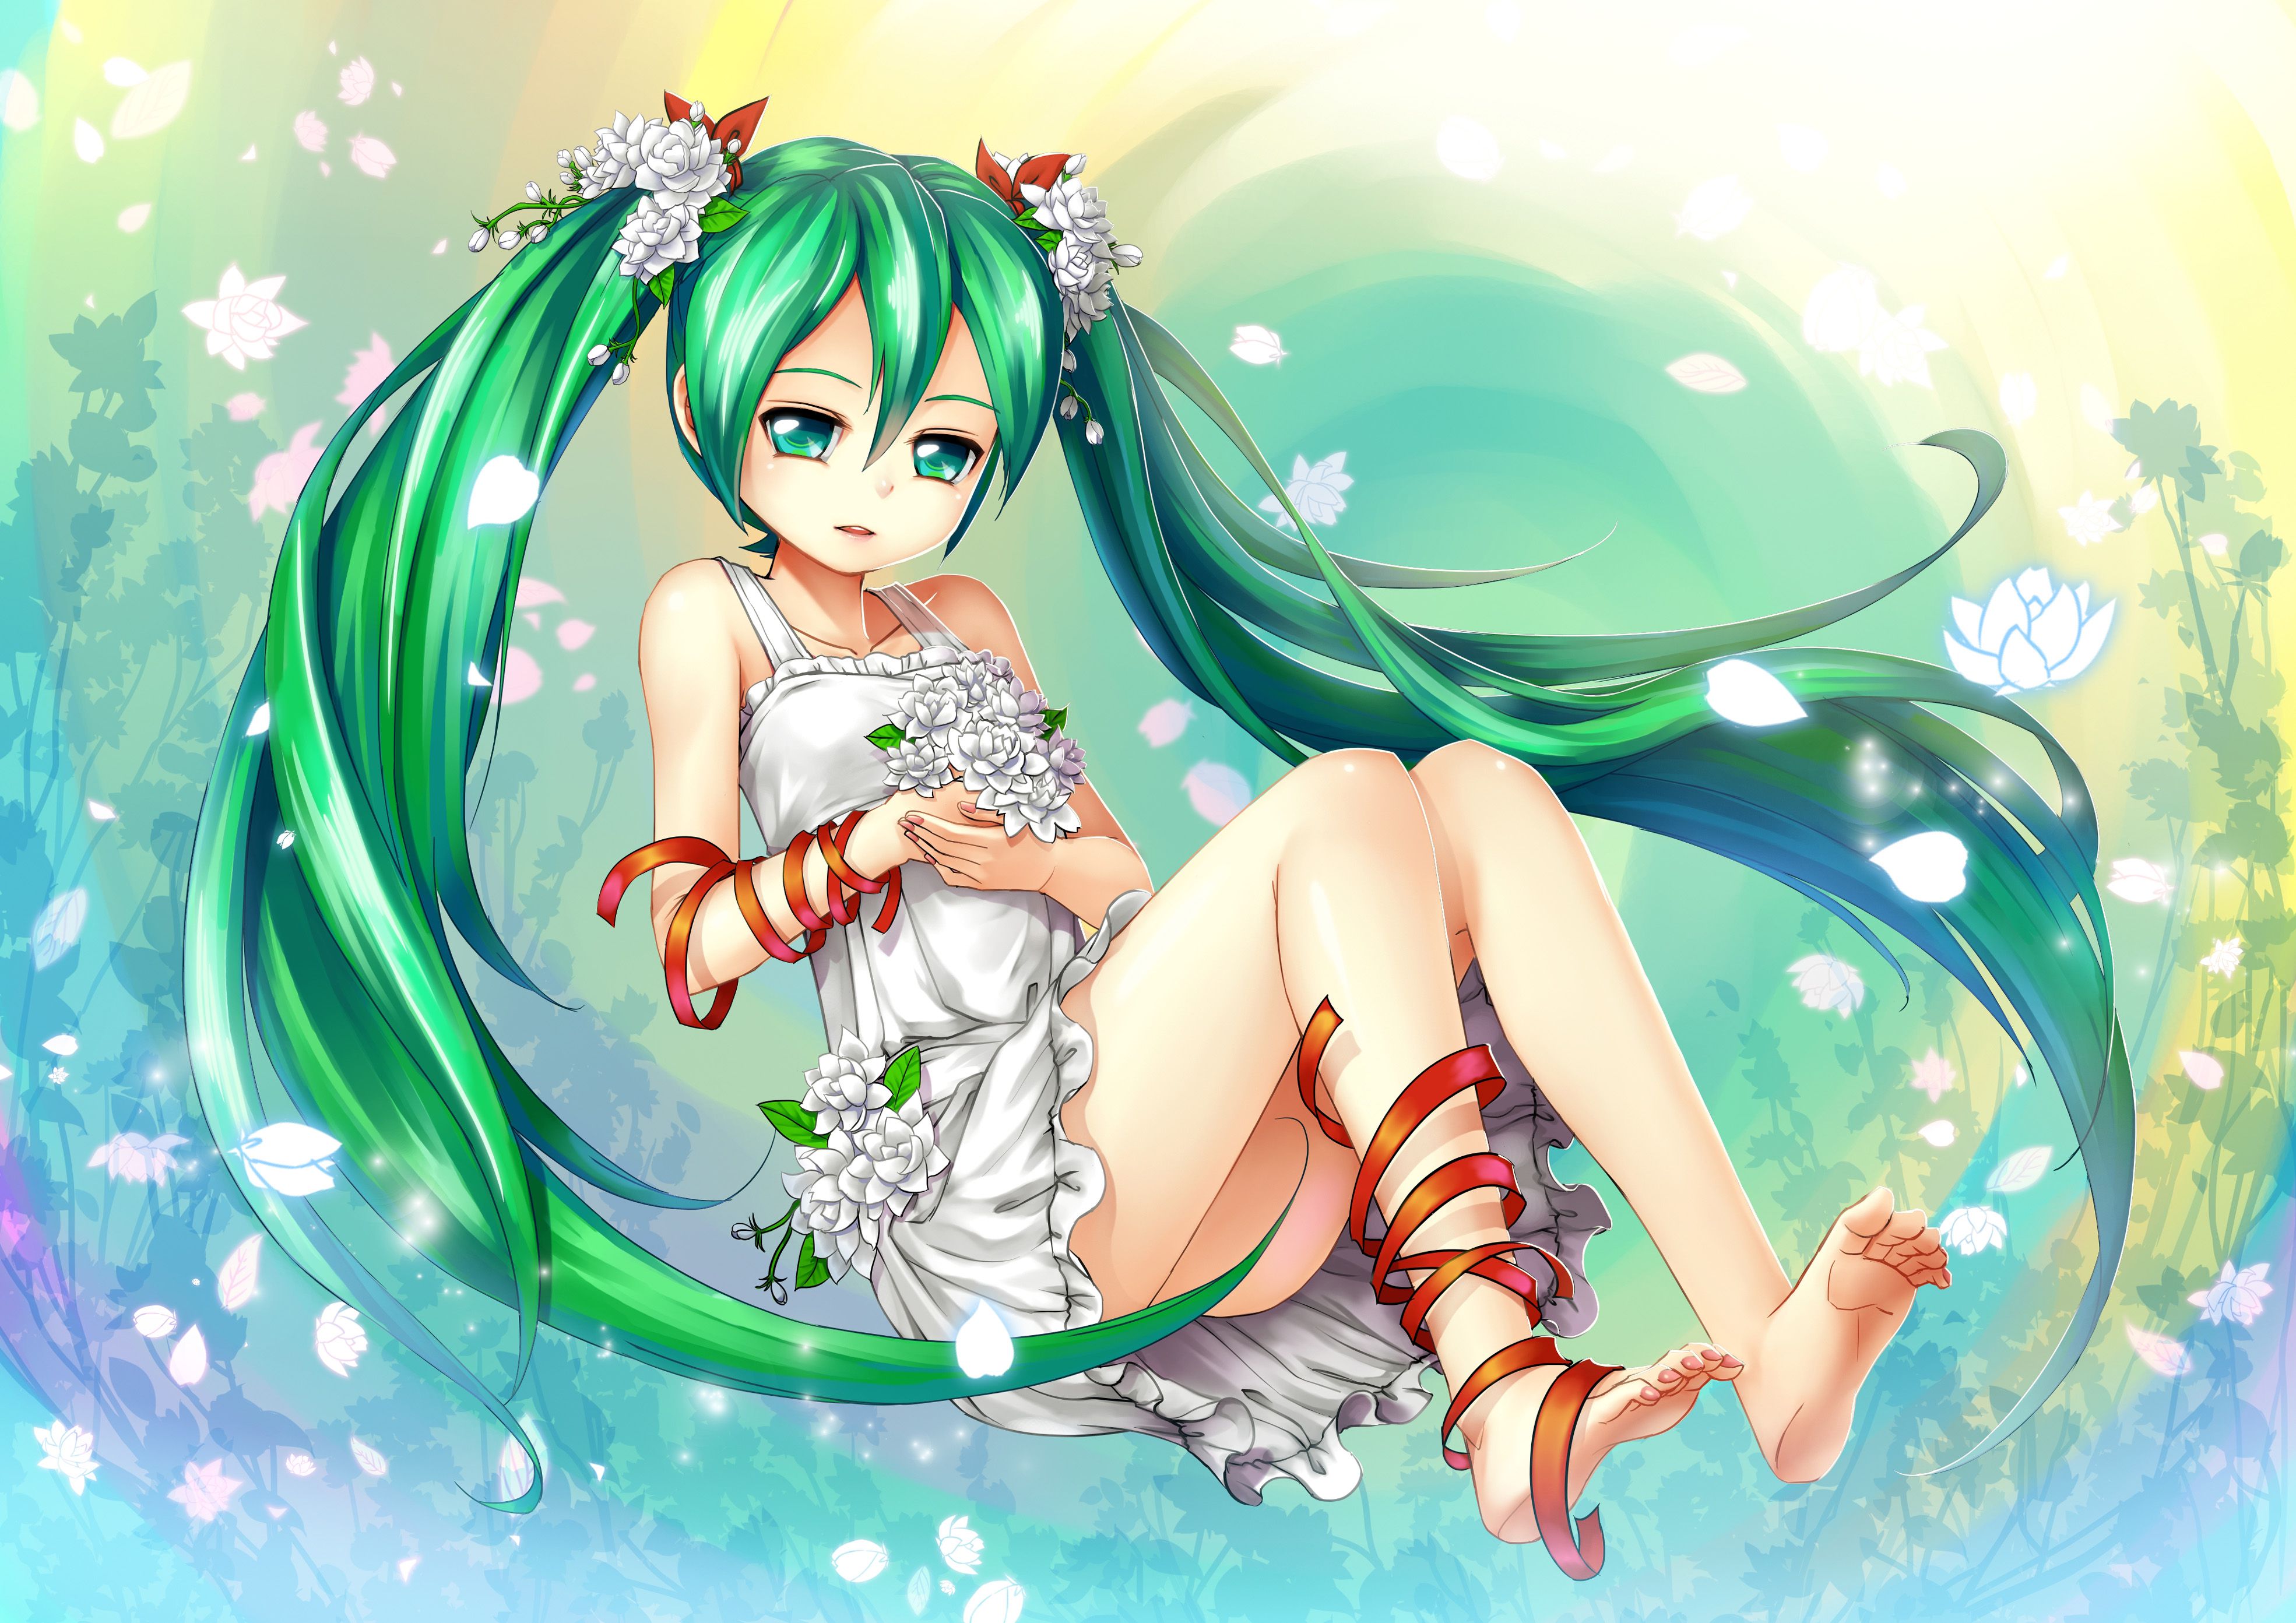 Assorted Miku images after a long absence. 31